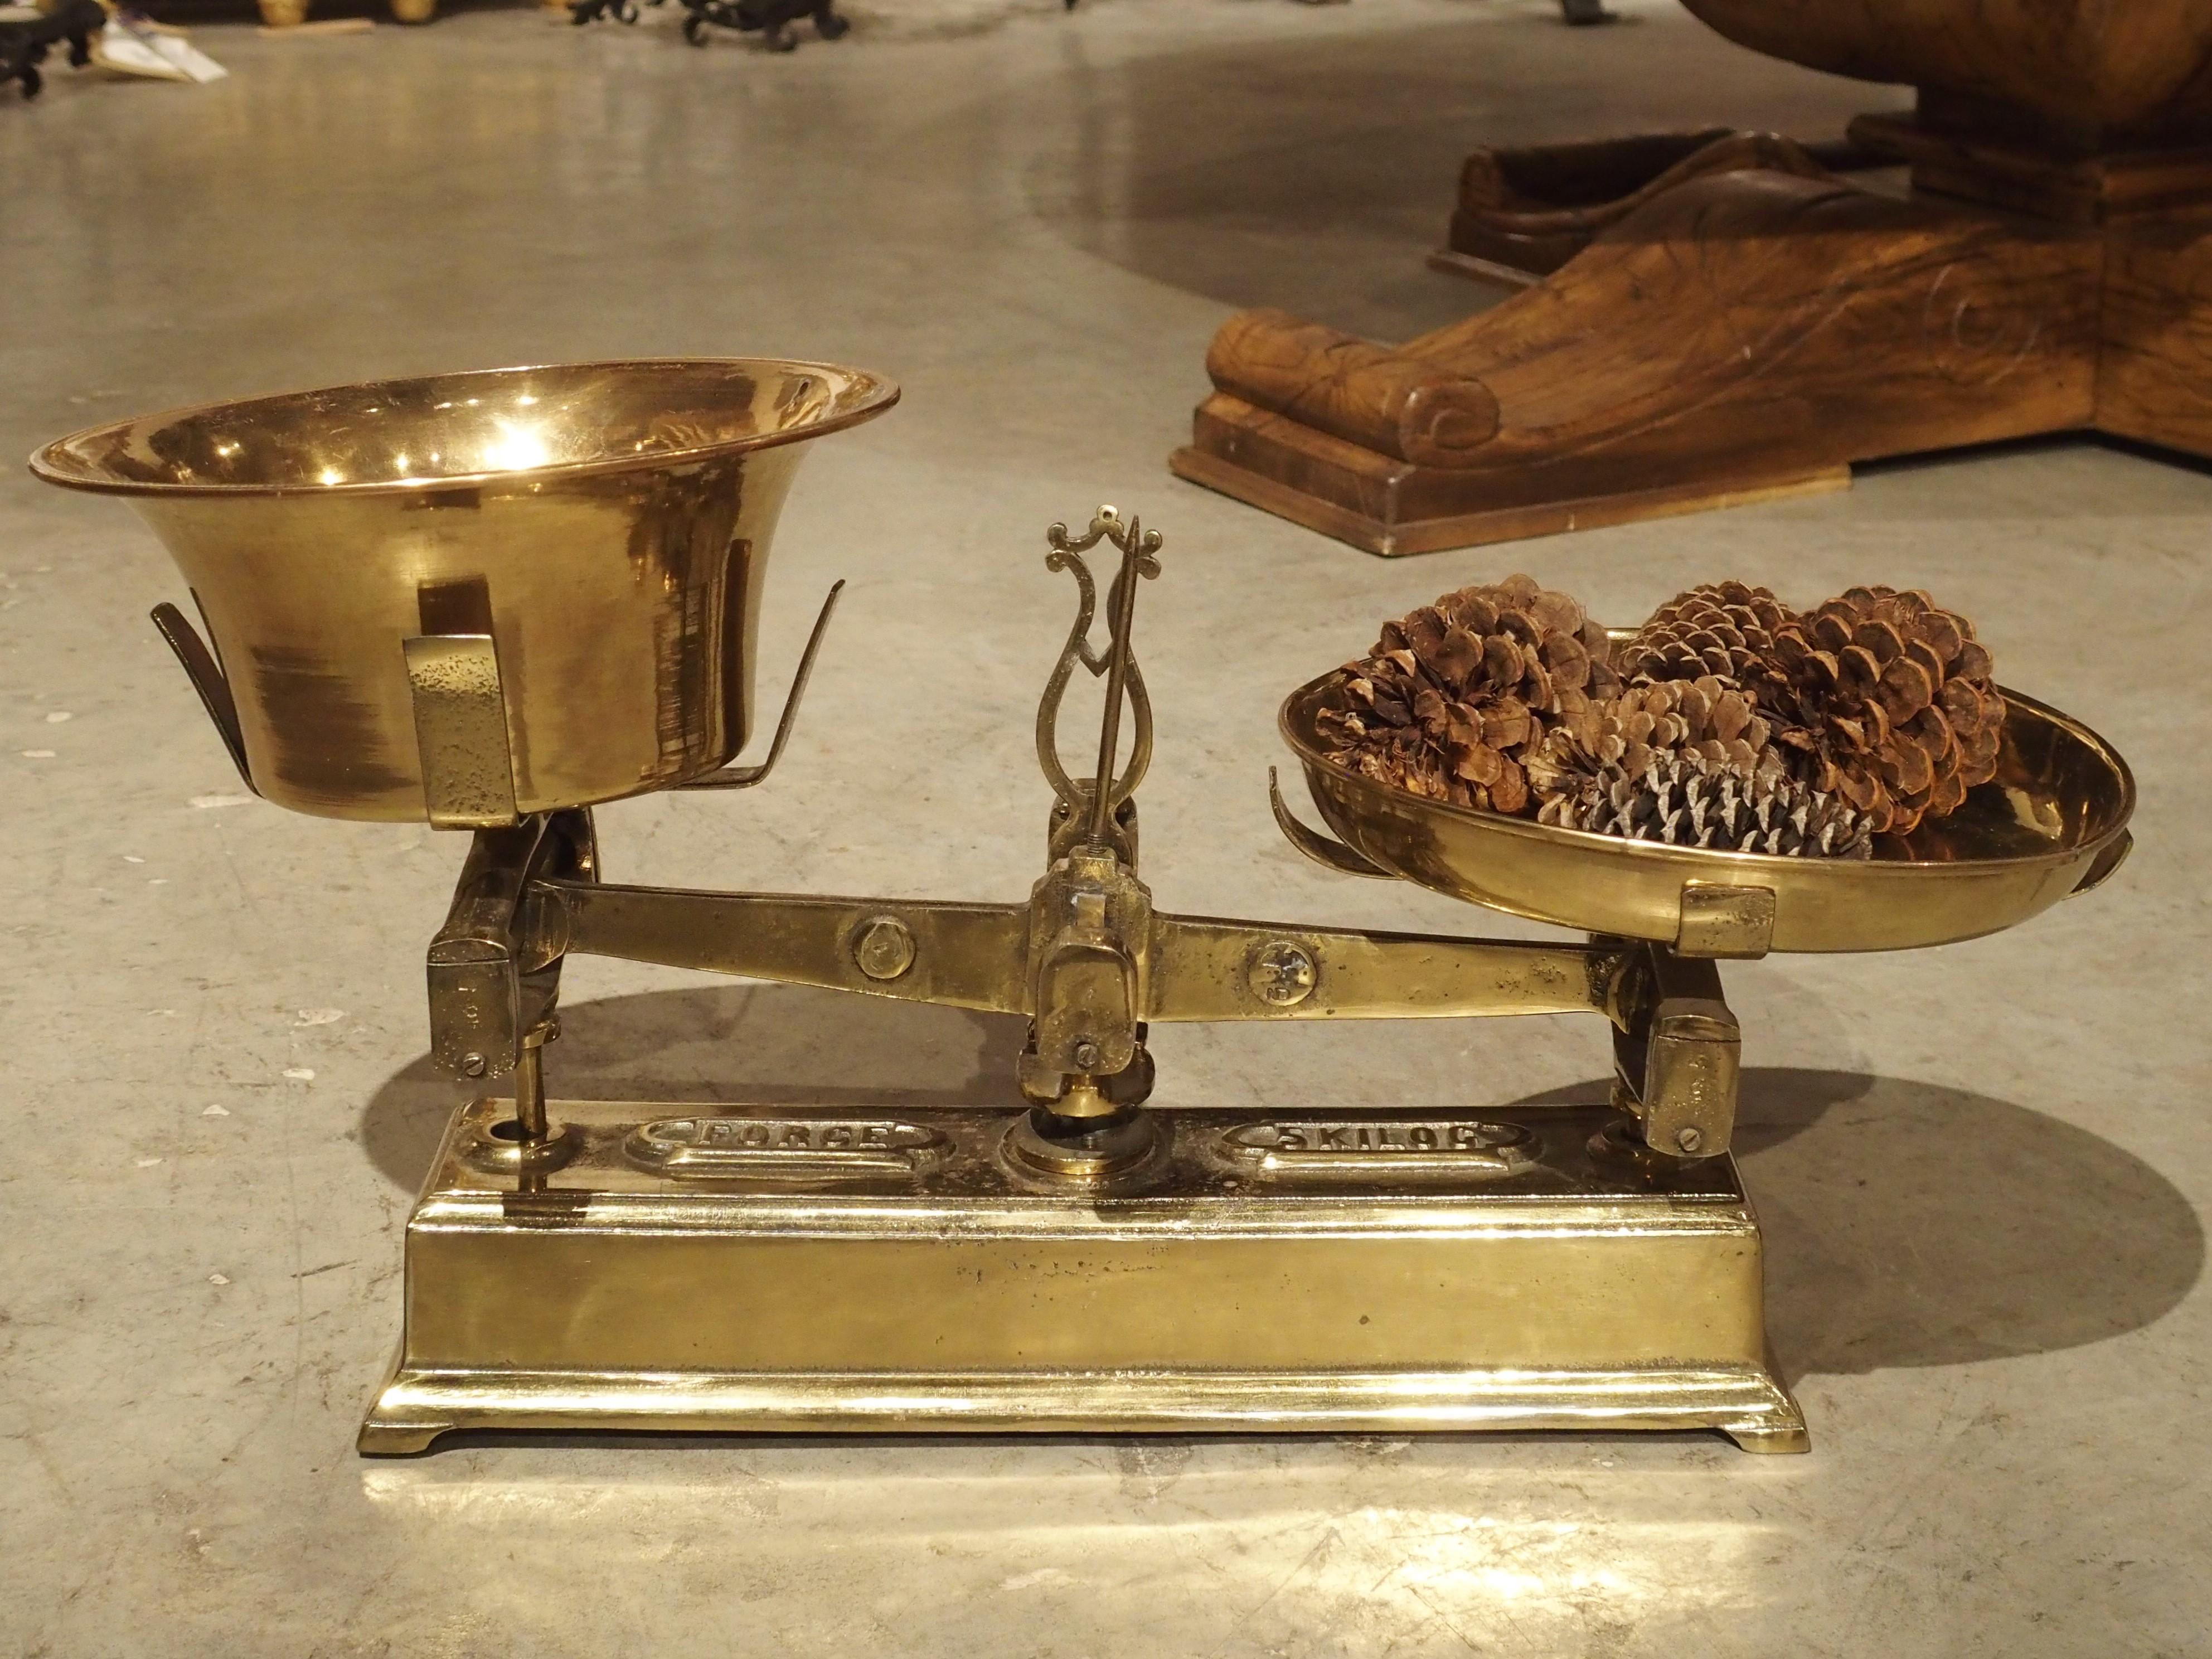 Made from iron and brass, this 5-kilogram scale comes from France during the 1800’s. French scales of this type were used in stores for weighing produce. The cast iron base has two marks underneath the scale arms. The imprint on the left says